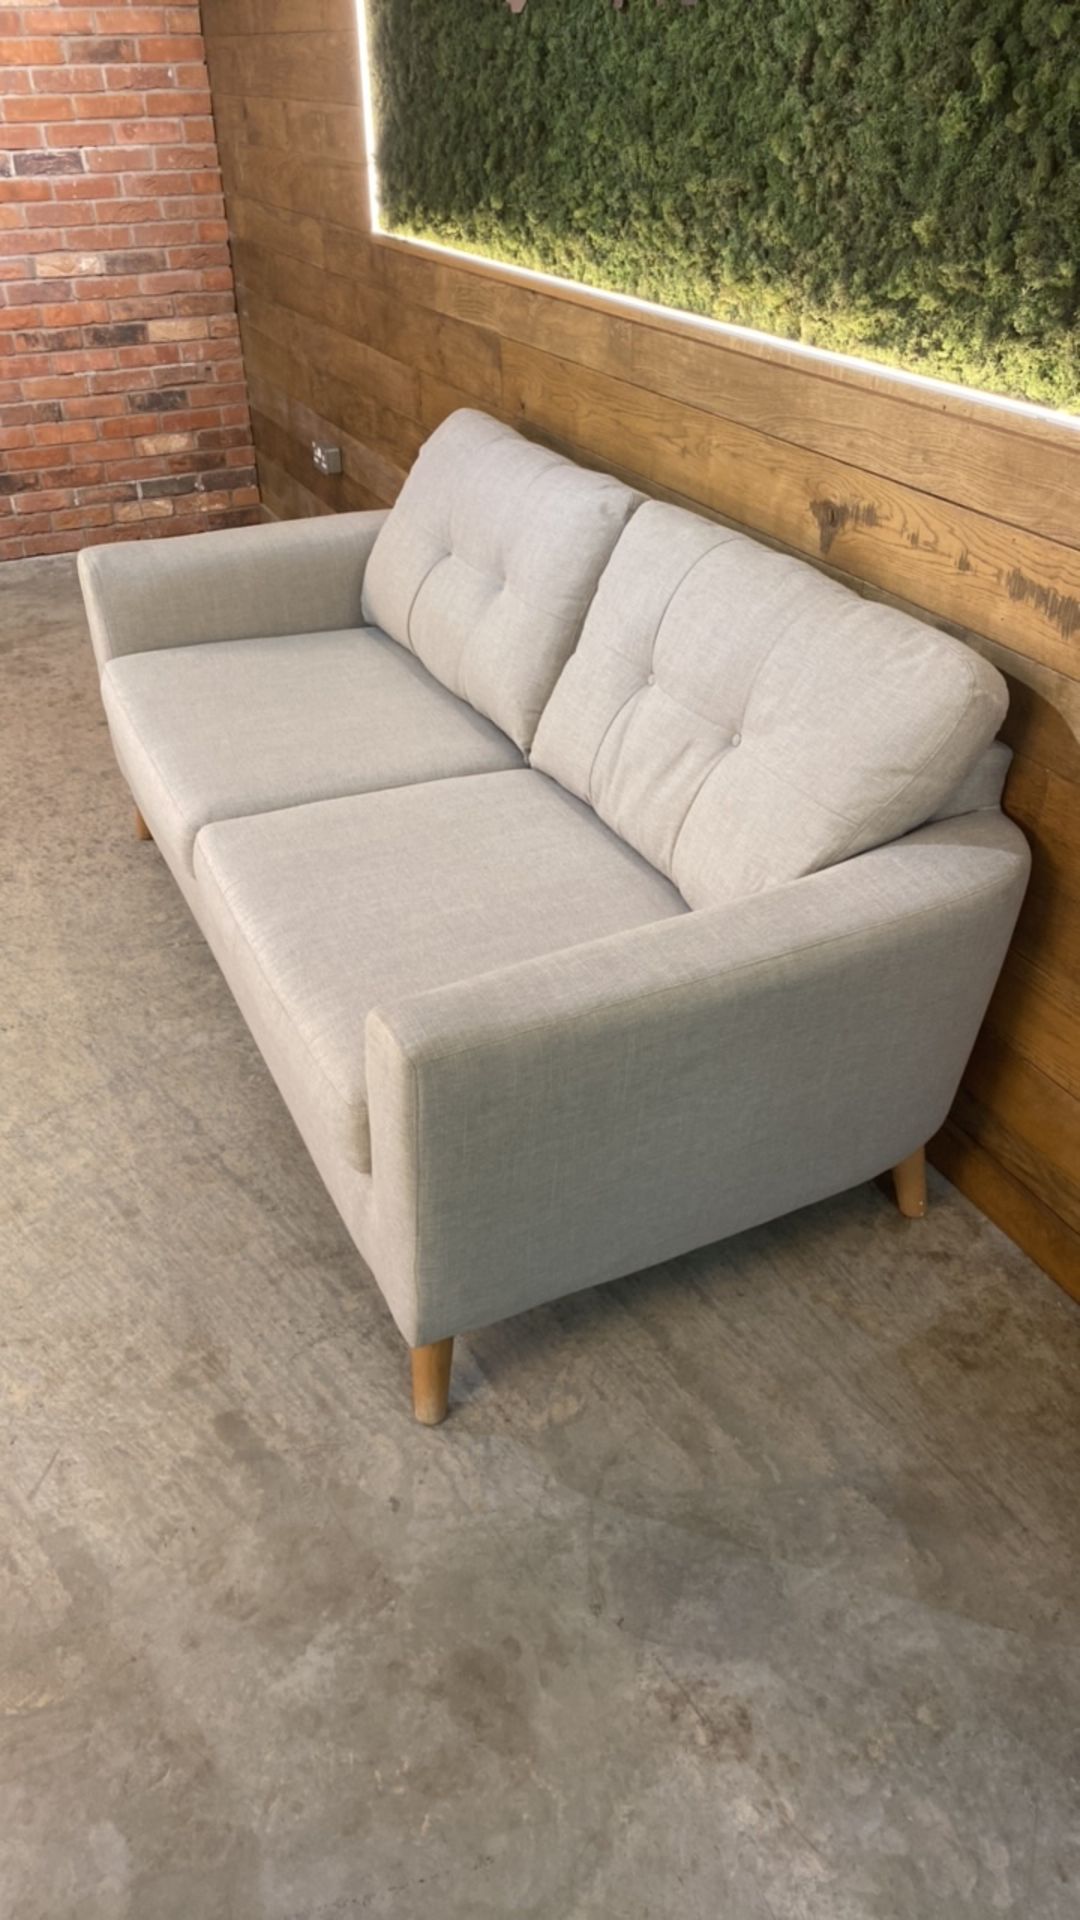 Two Seater Grey Sofa - Image 3 of 5